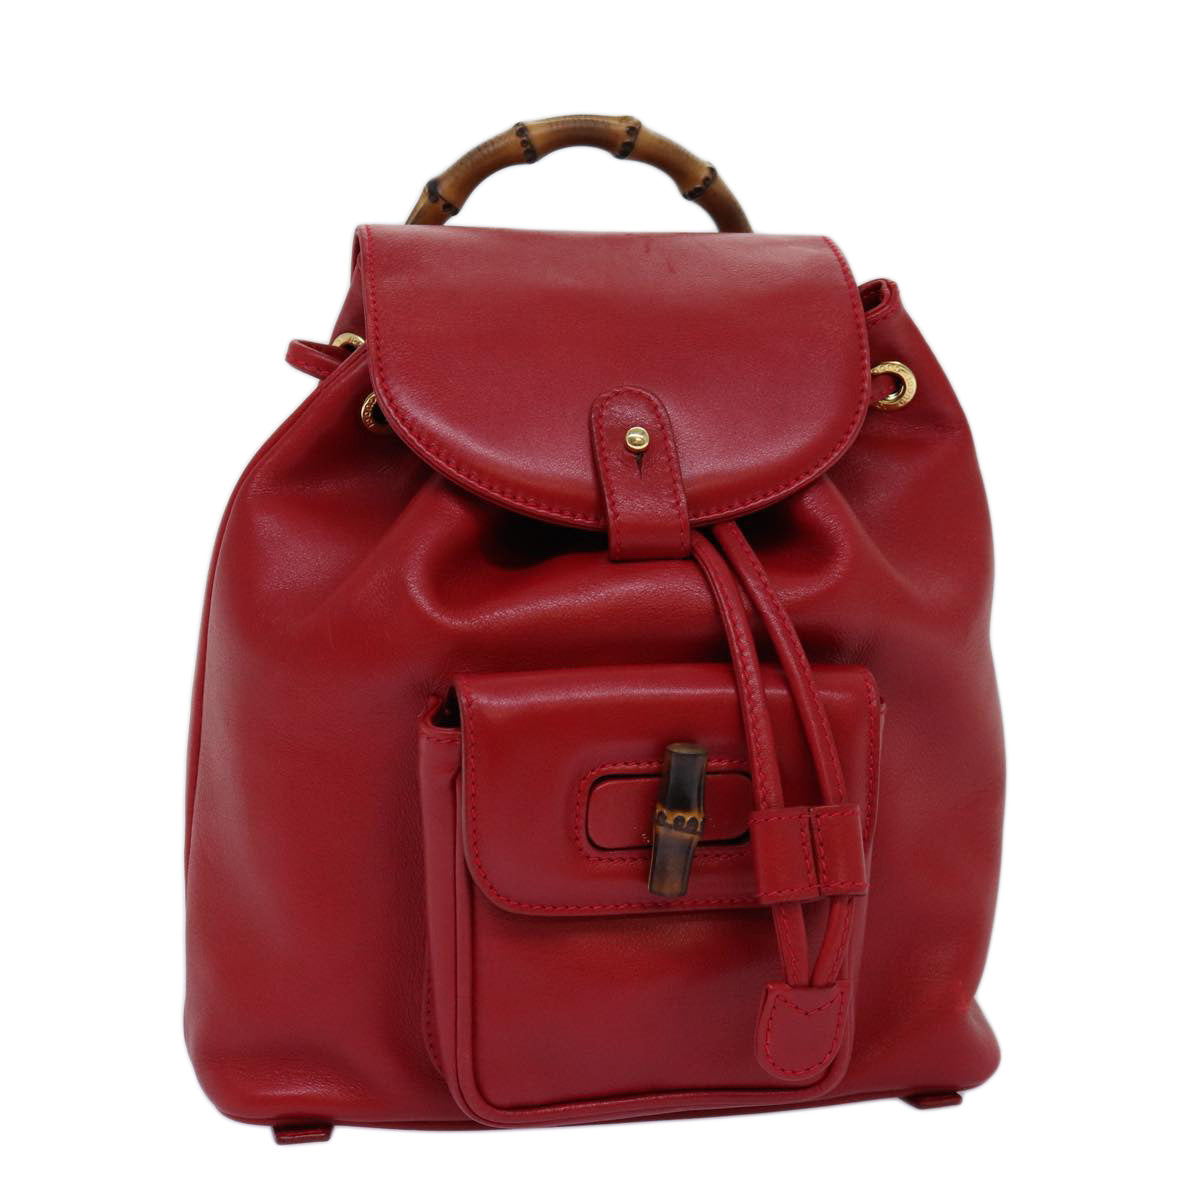 GUCCI Bamboo Backpack Leather Red 003 2852 0030 0 Auth mr165